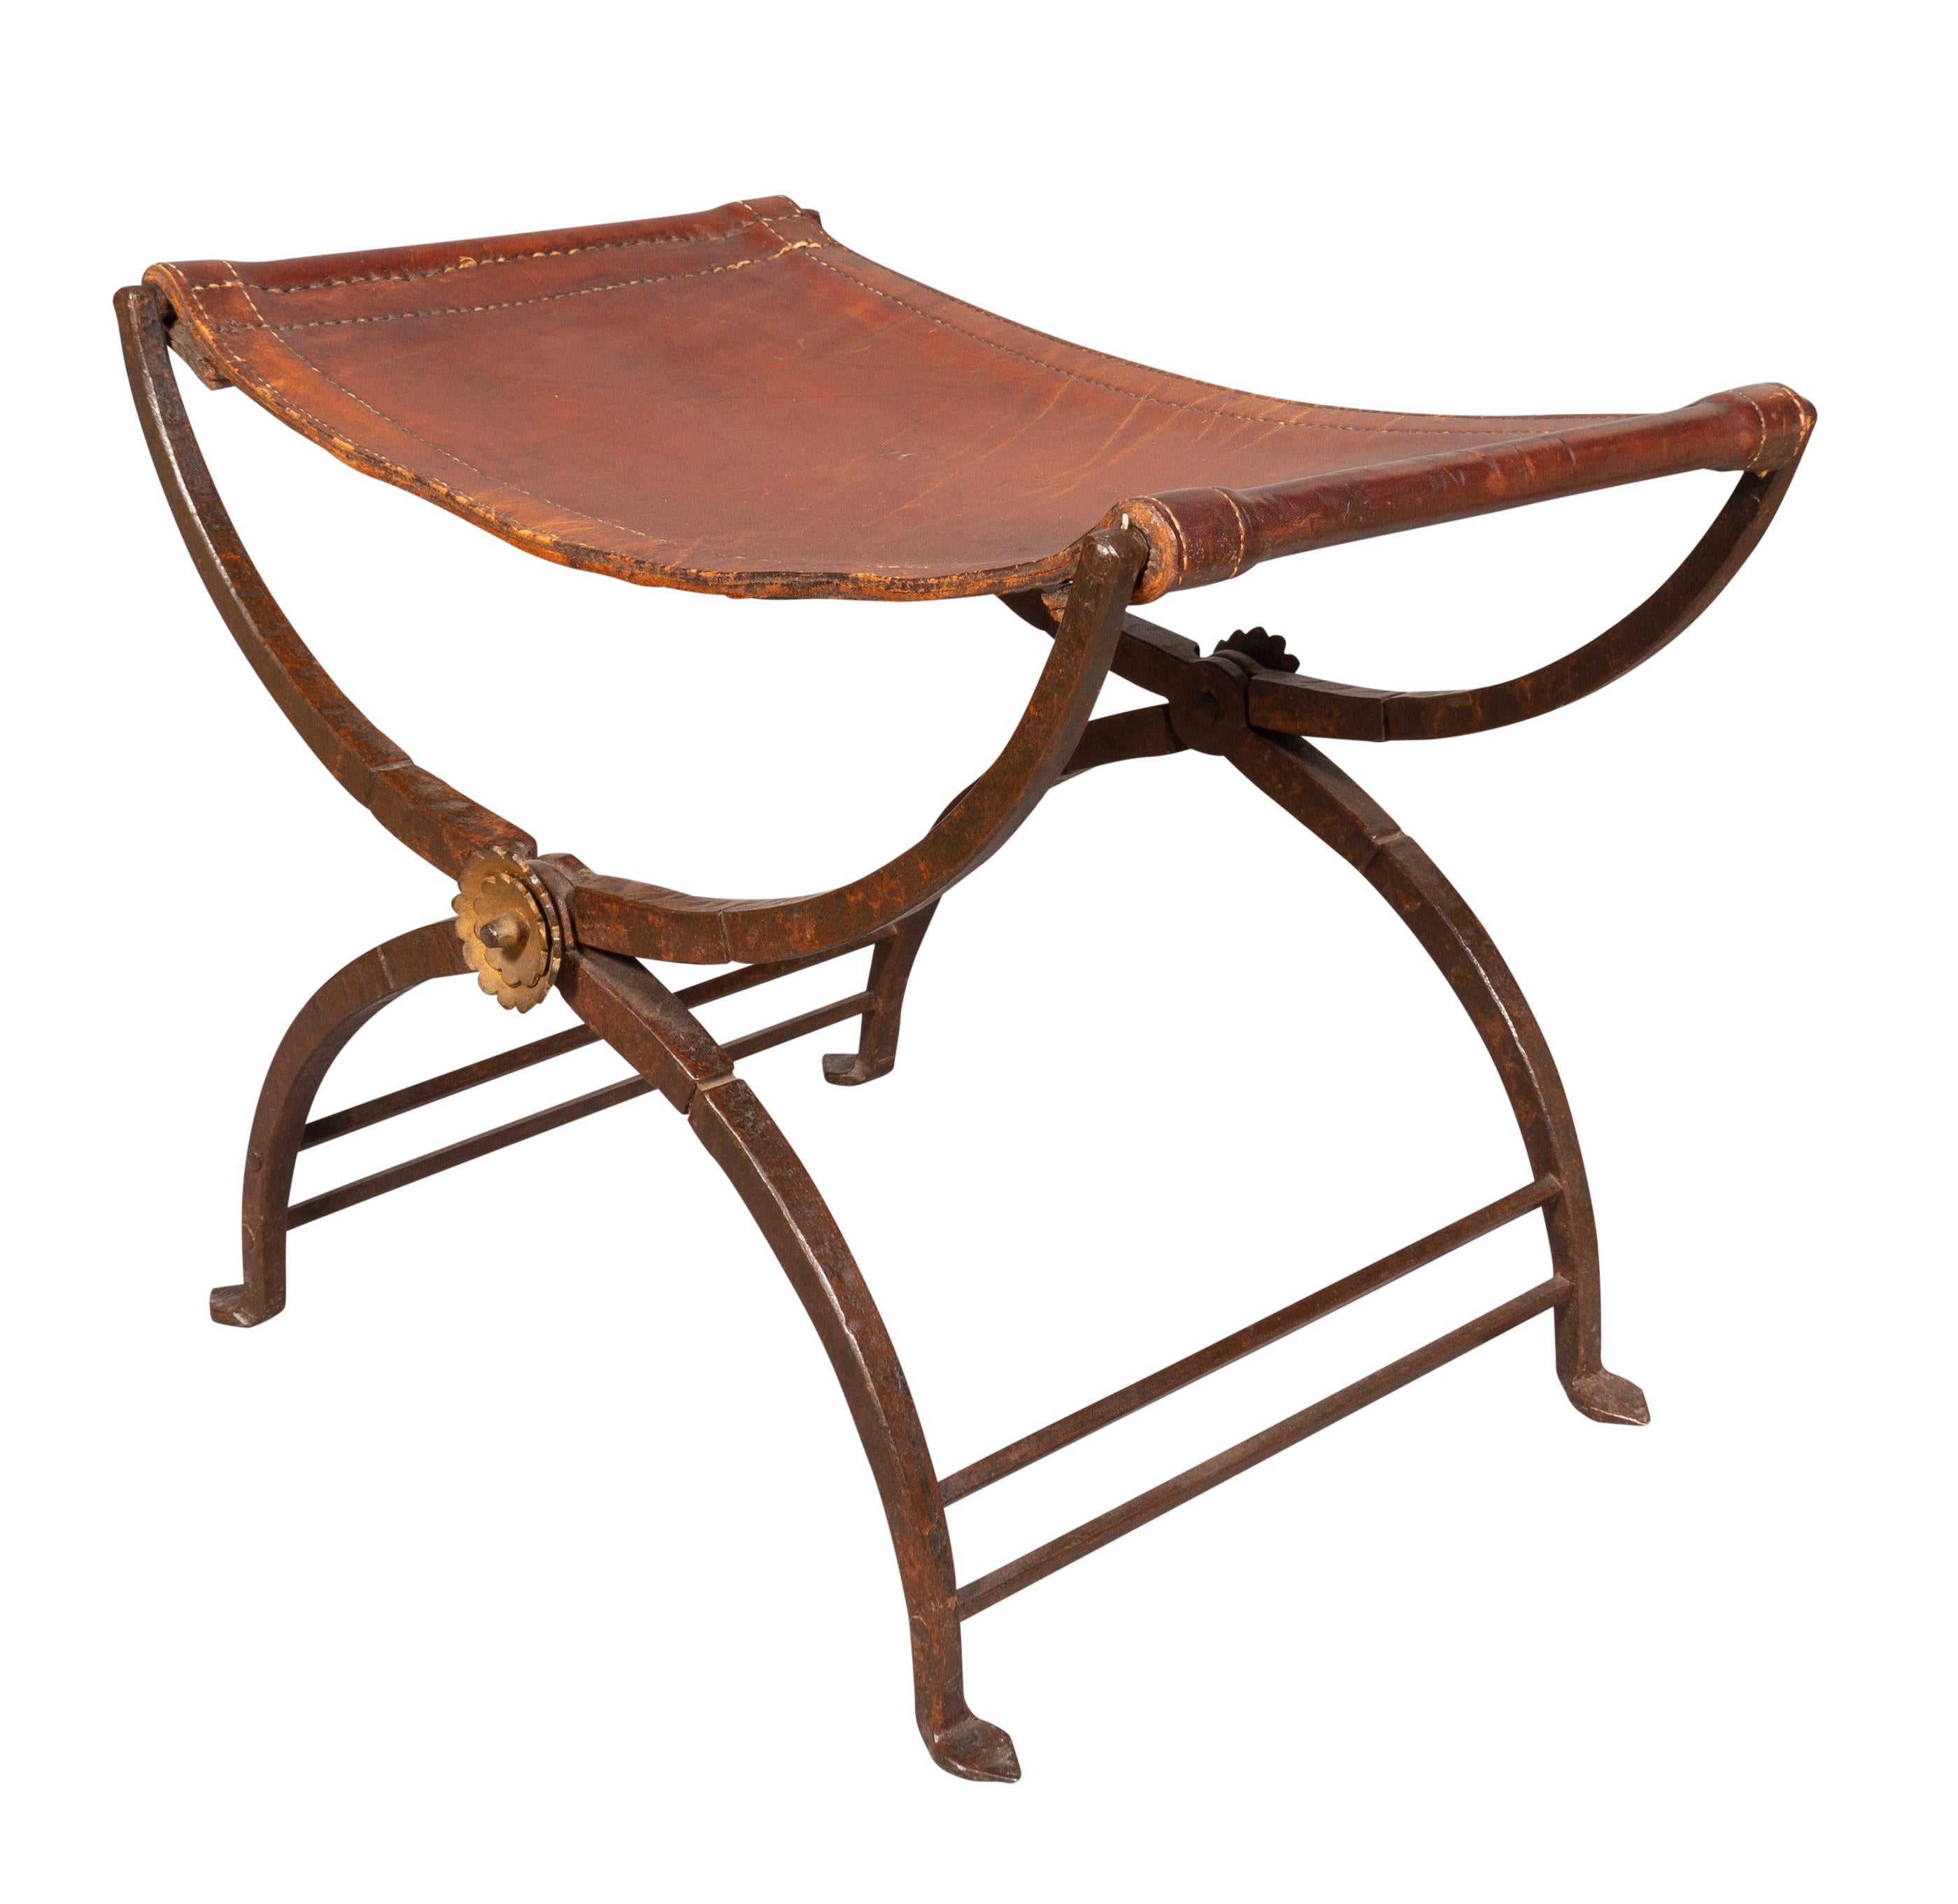 Mid-20th Century Spanish Wrought Iron and Leather Bench For Sale